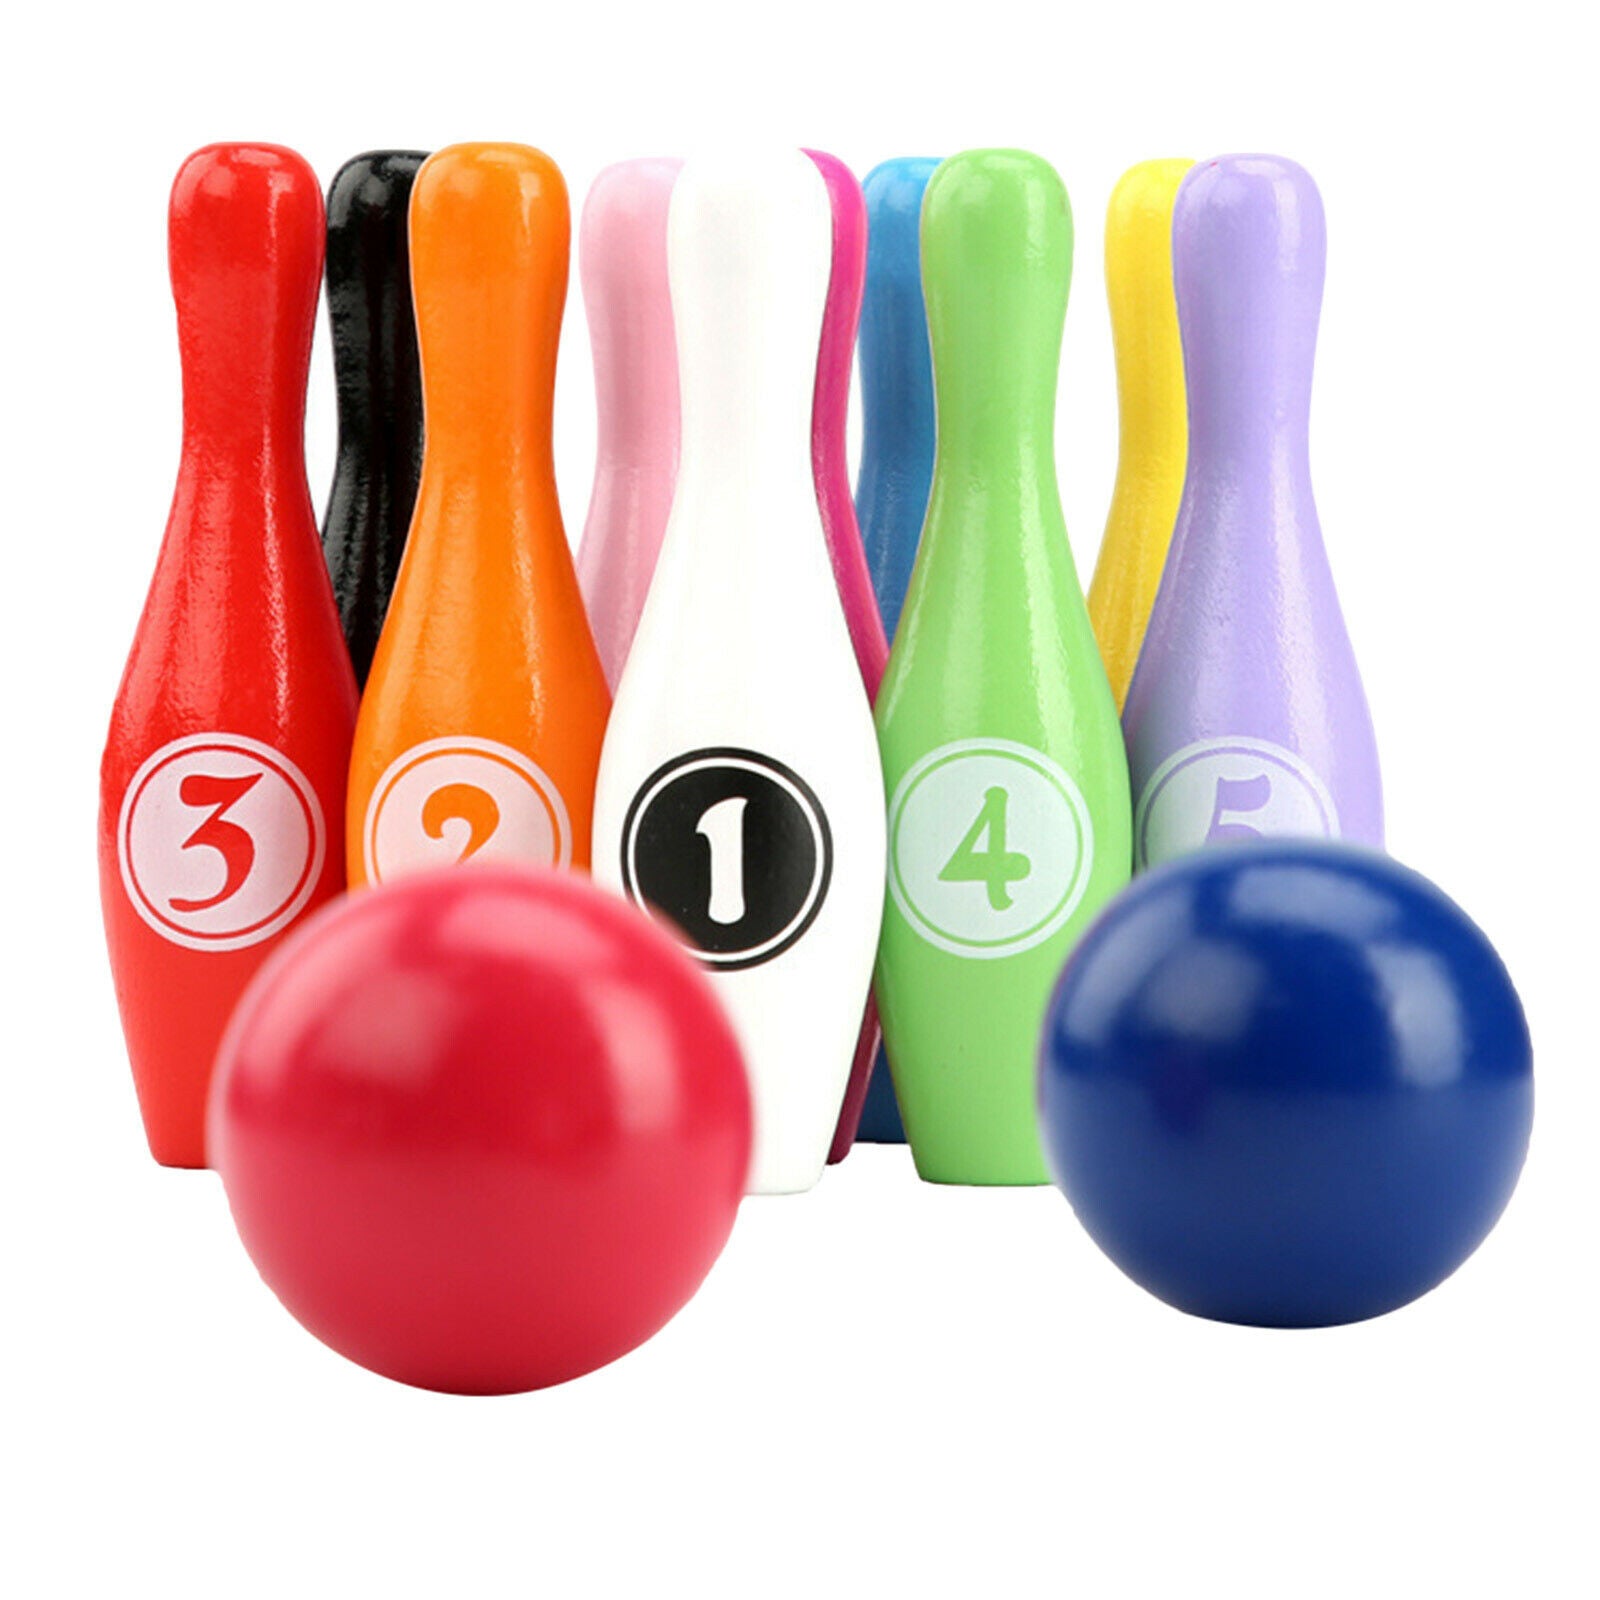 Wooden Bowling Game Set Pins & Balls Education Outdoor Sports Fun Family Toys